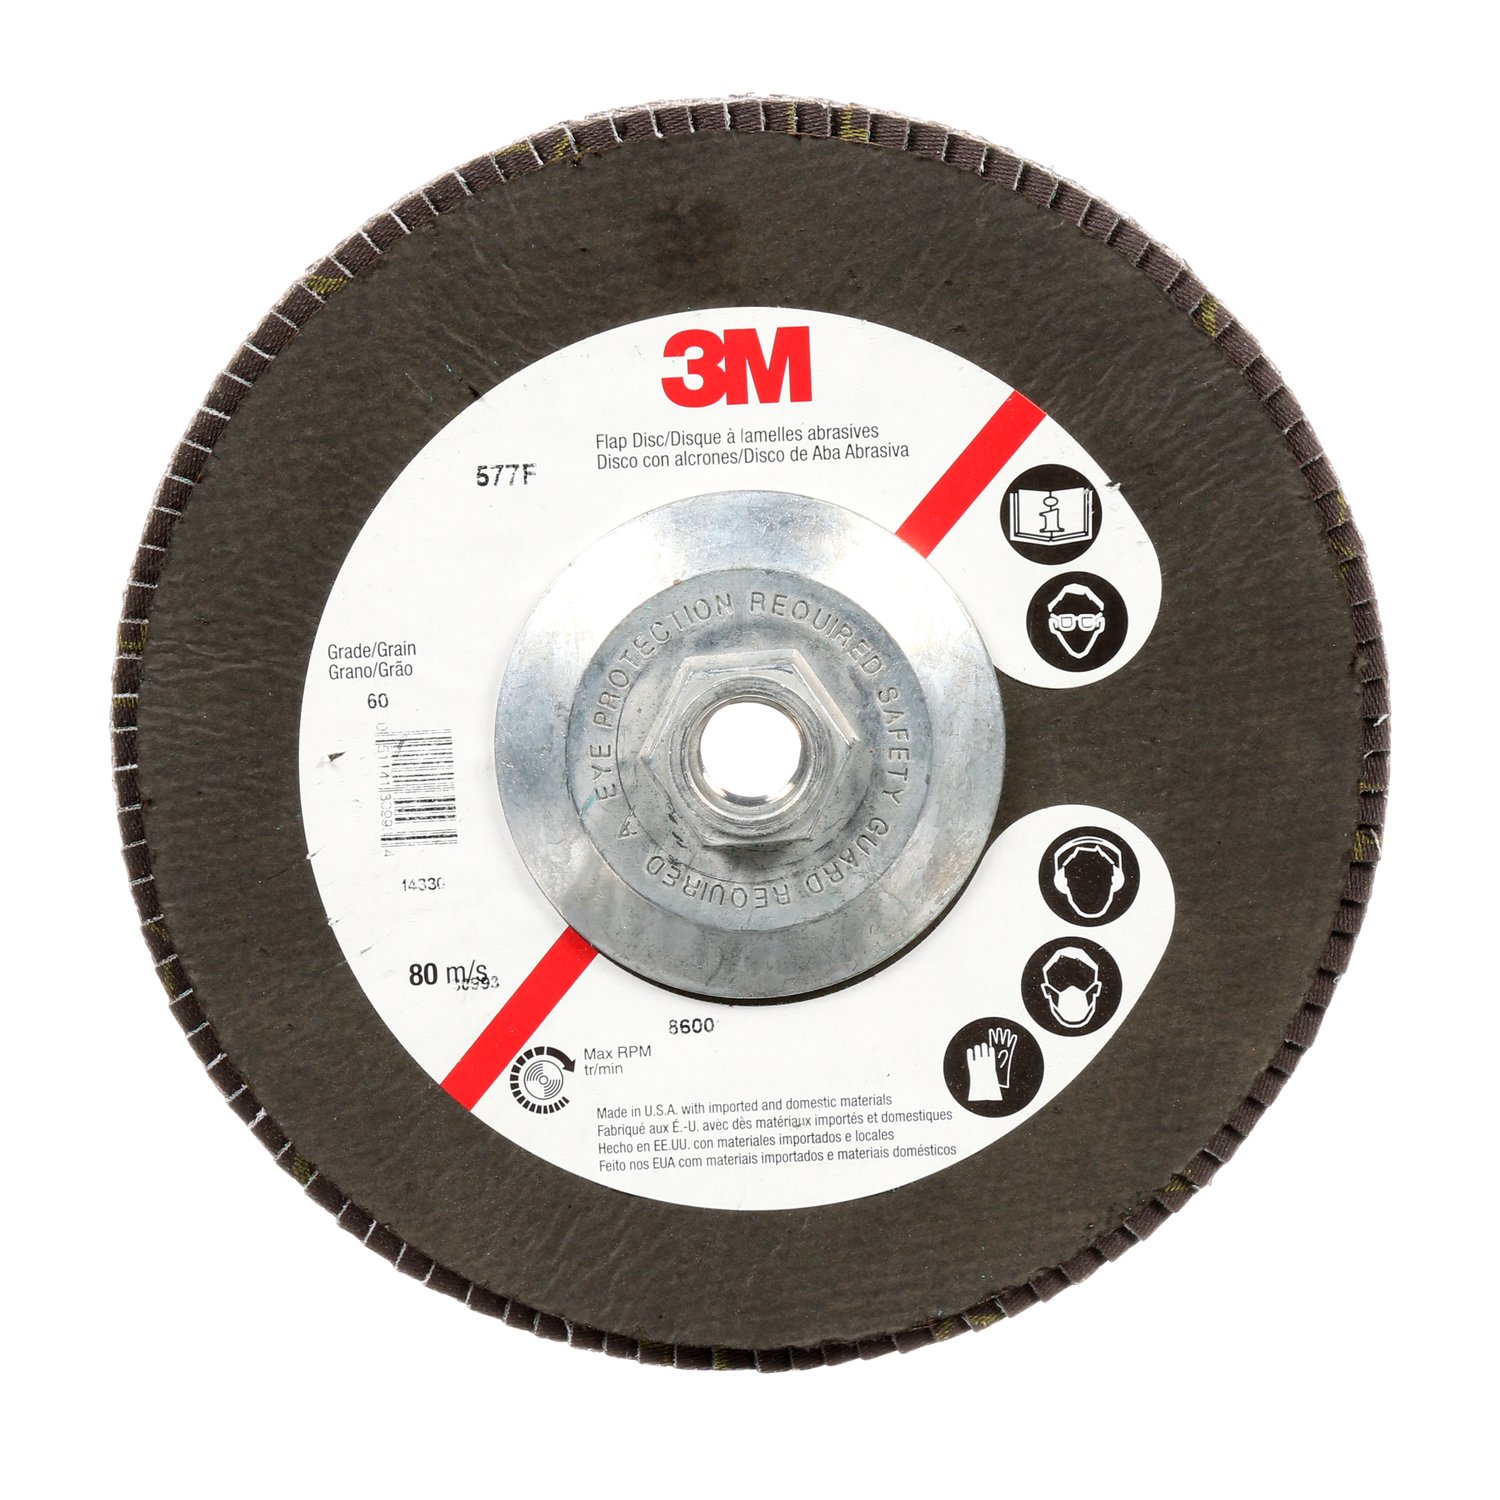 7010363148 - 3M Flap Disc 577F, 40, T27 Quick Change, 4-1/2 in x 5/8 in-11, Giant,
10 ea/Case